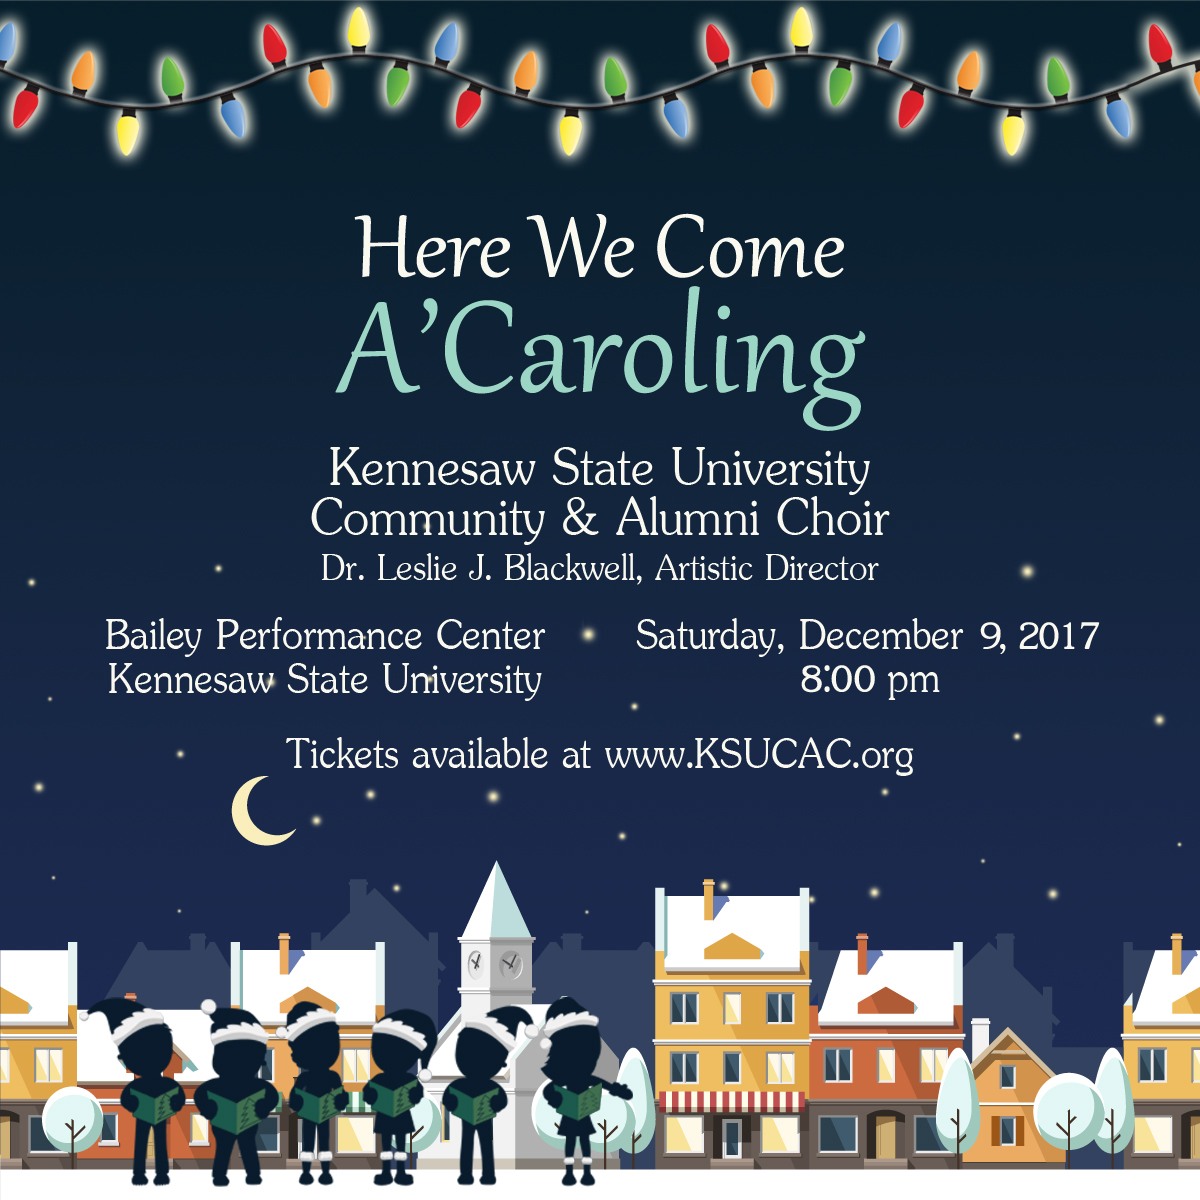 Here We Come A'Caroling